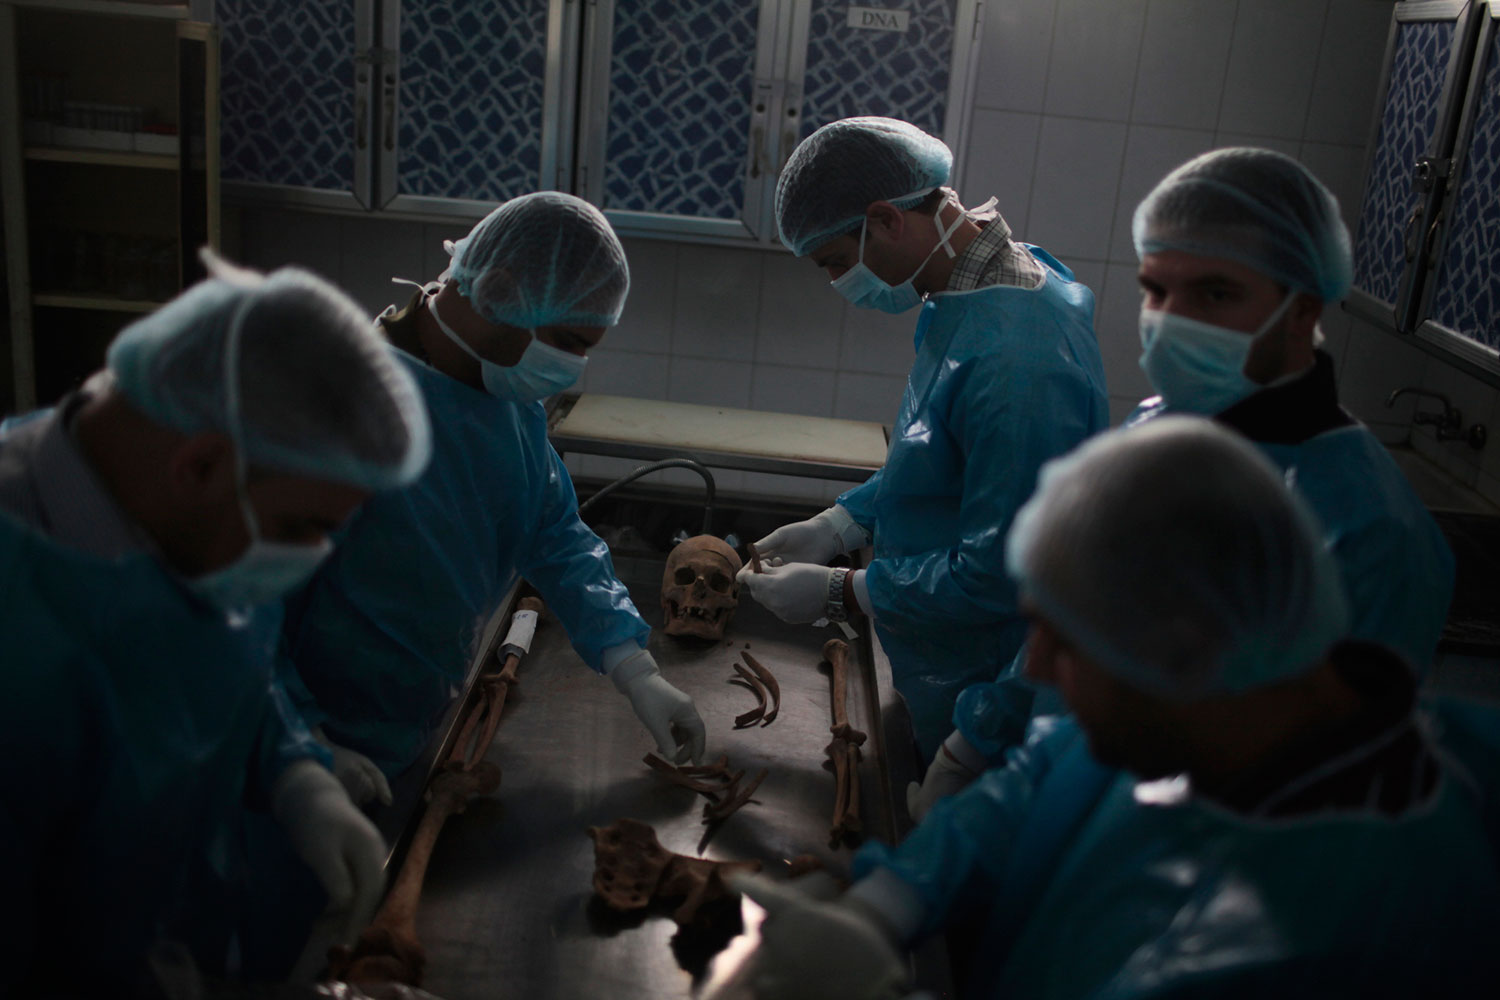 Baghdad, Iraq. May 2, 2011.
                               This group of forensic anthropologists had the grisly task of excavating mass graves found throughout Iraq, and identifying exhumed remains, some decades old. In the same morgue, fresh bodies of those killed in conflict streamed in.